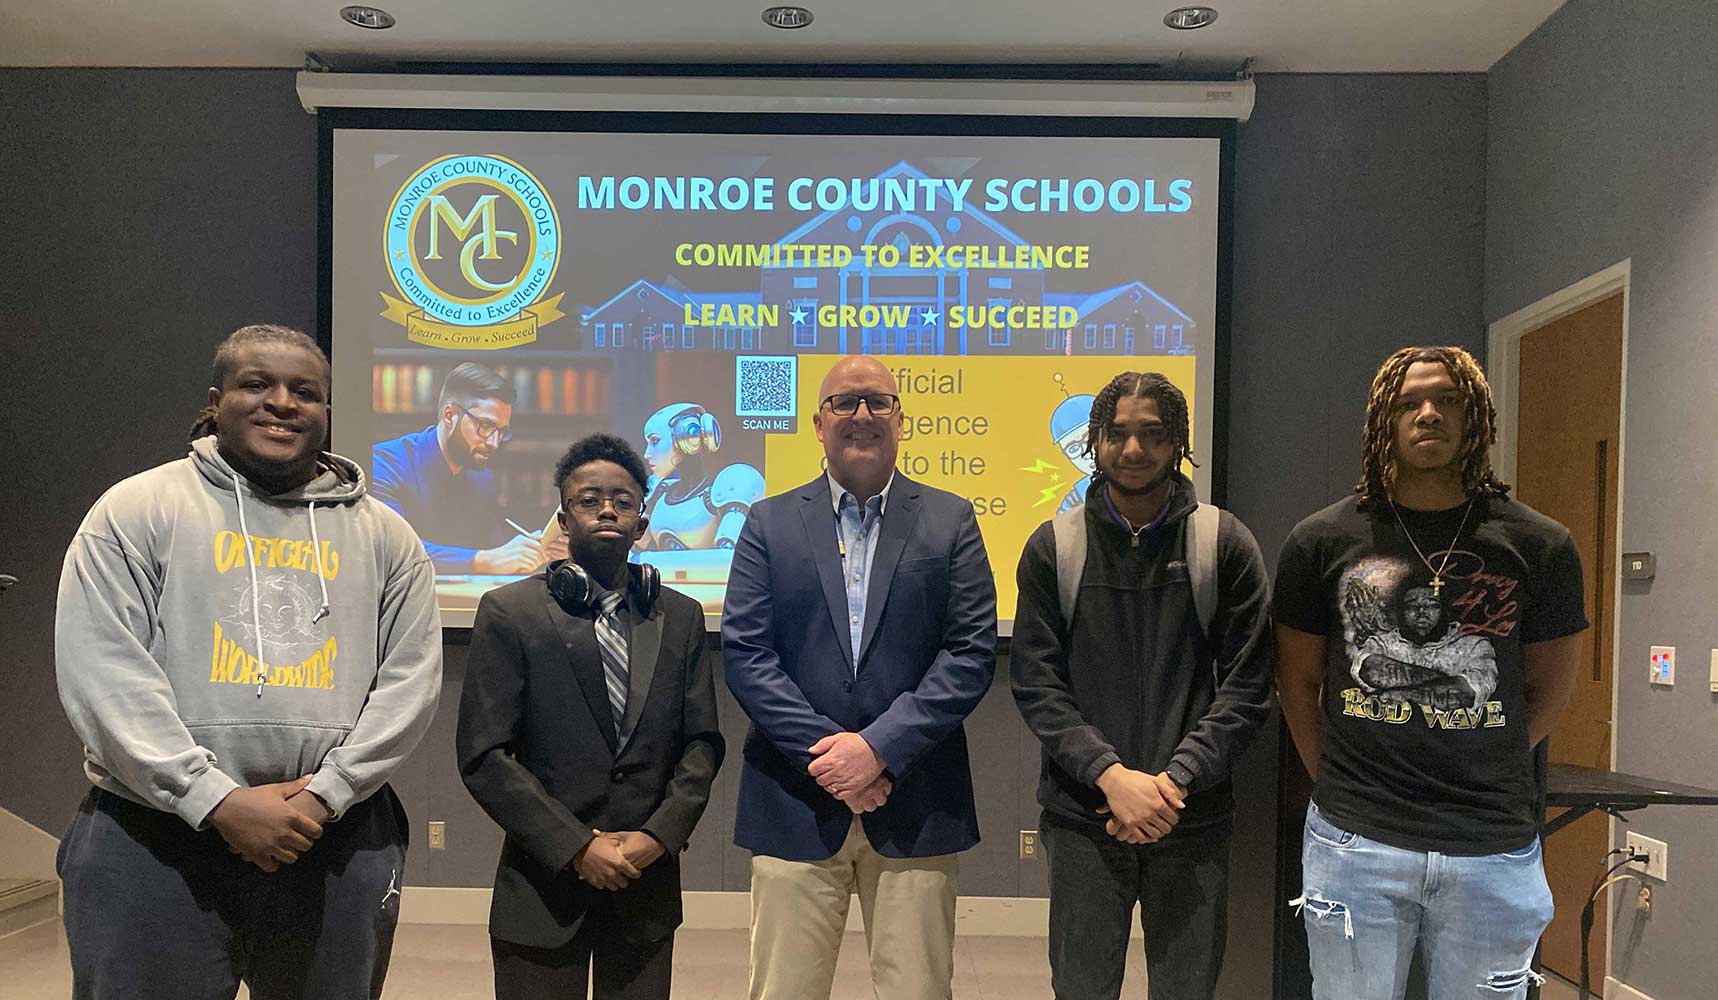 Coach Shipman is pictured with MGA Association of Information Technology students.